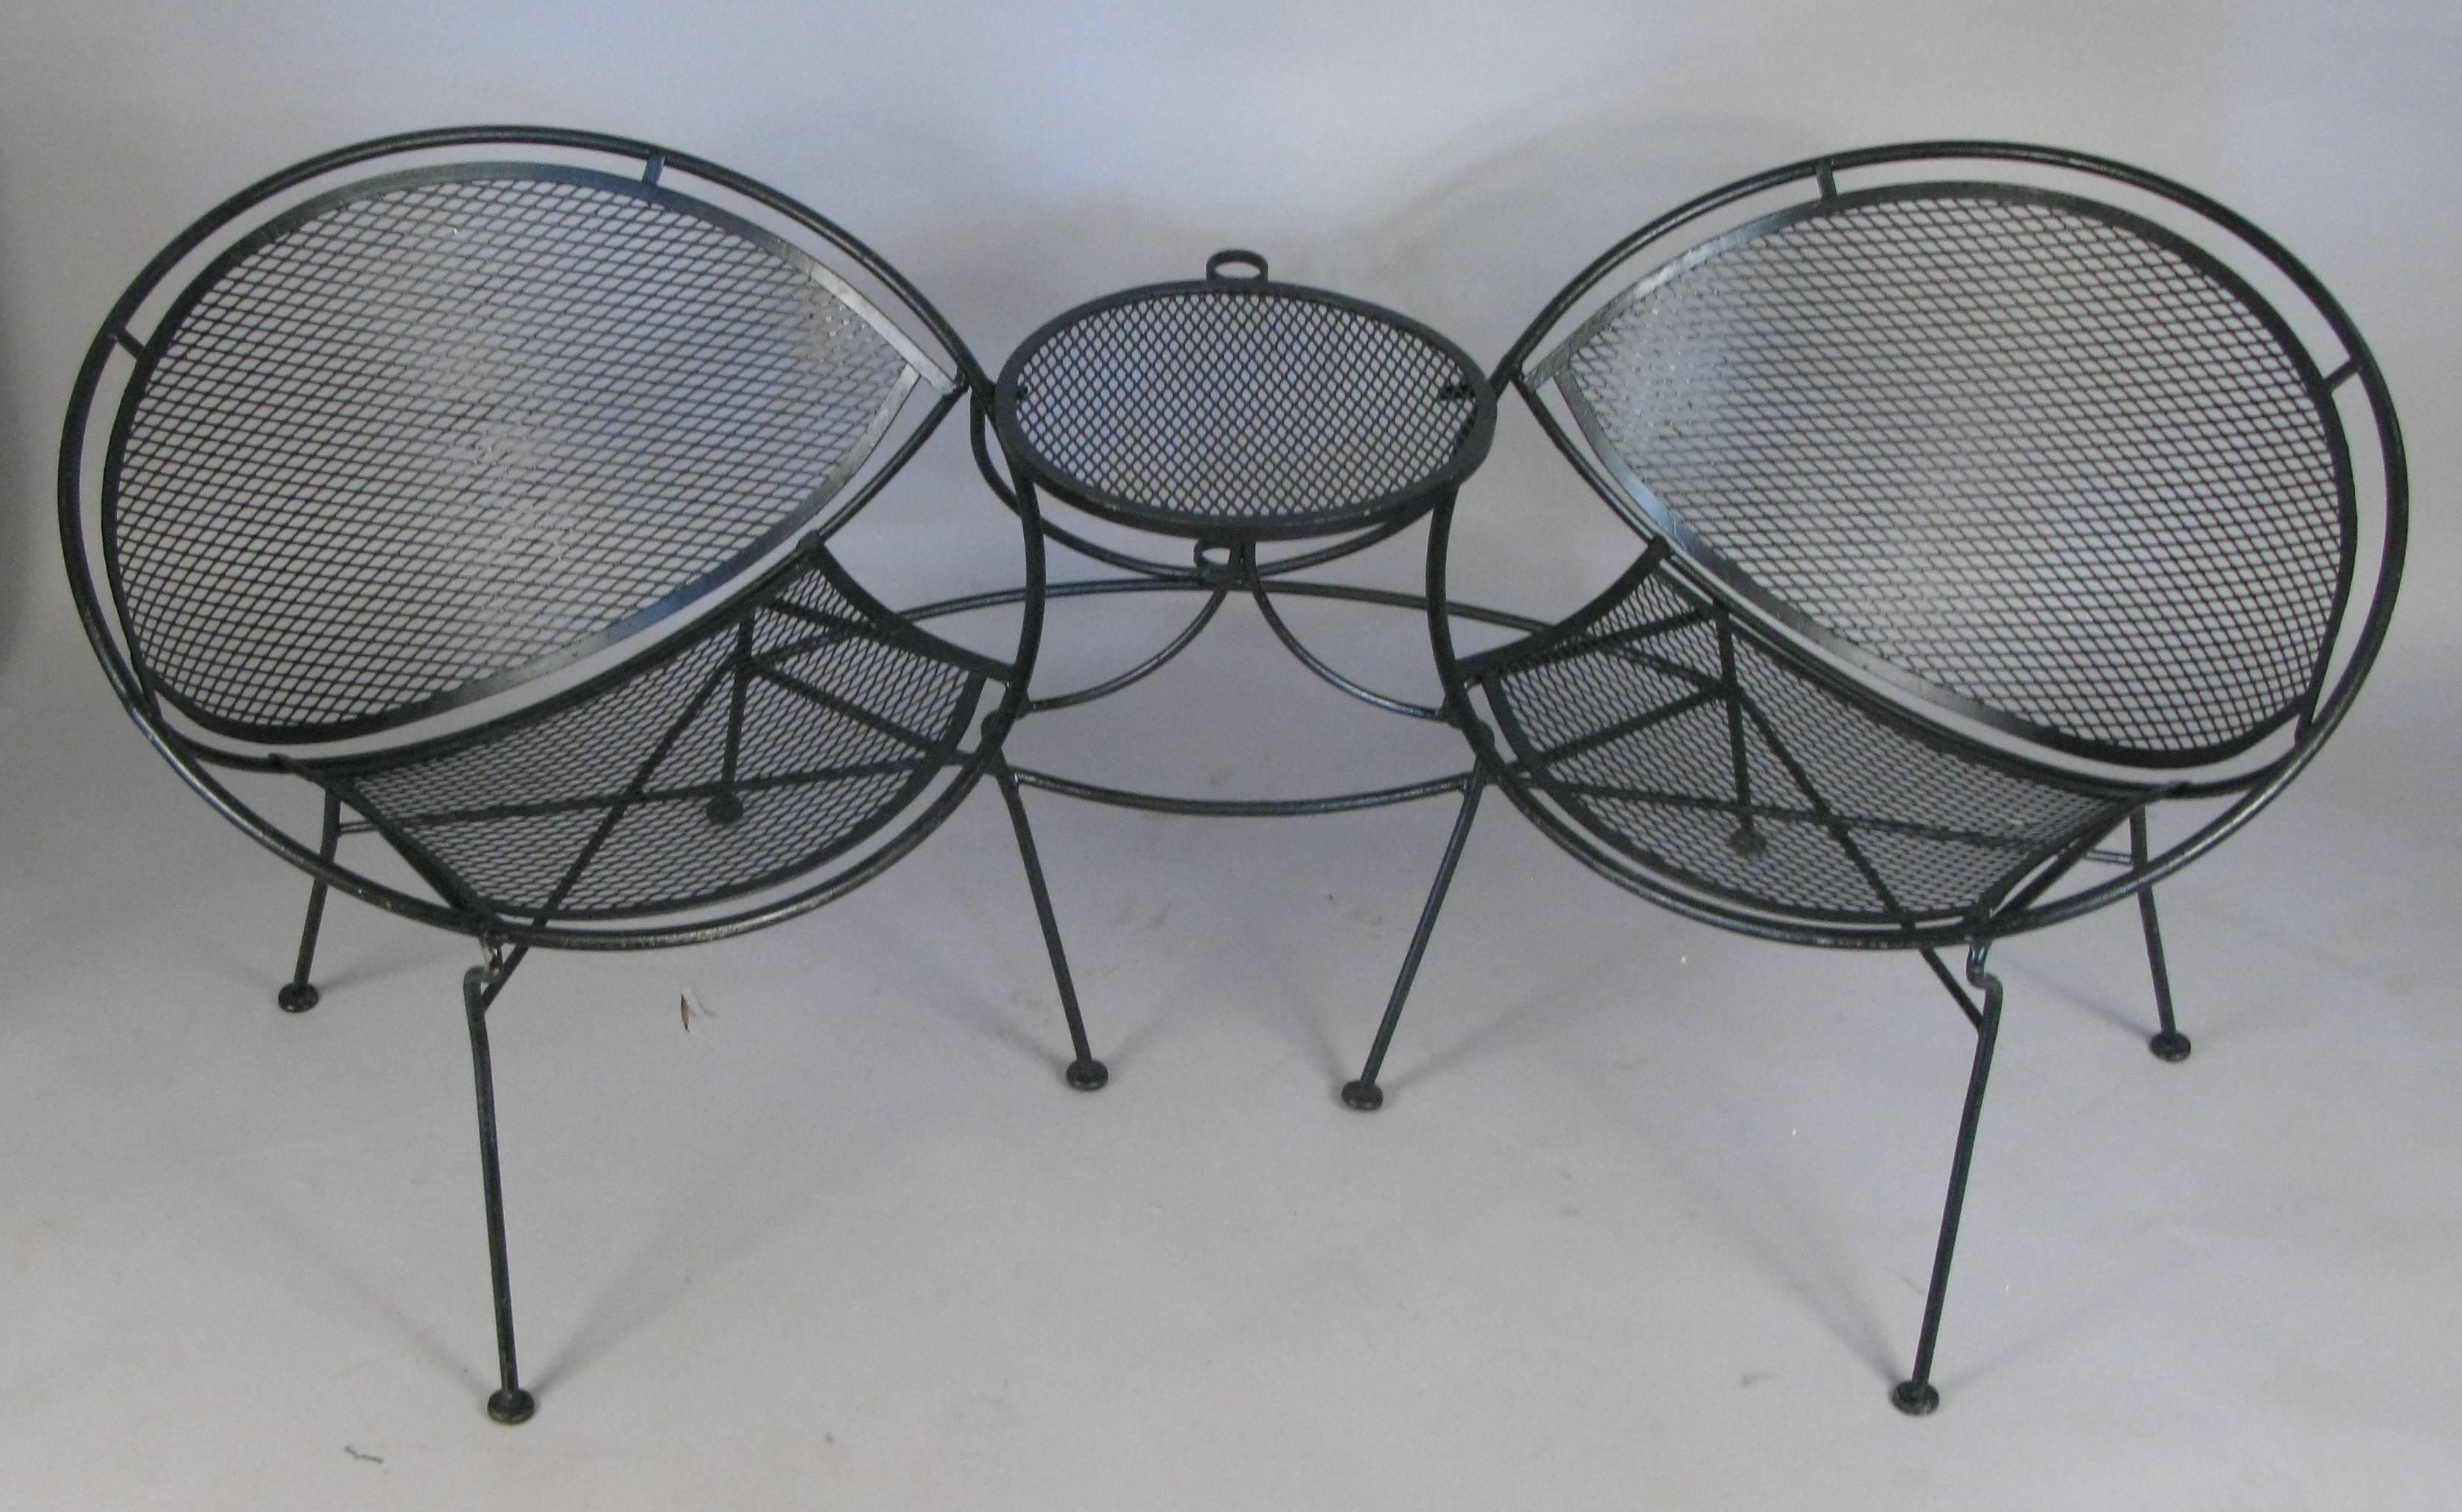 A 1950s wrought iron 'tête-à-tête' settee lounge from Salterini's Radar collection, designed by Maurizio Tempestini. Very comfortable and stylish, the two lounge chairs are connected by a table between, which also incorporates an umbrella holder.